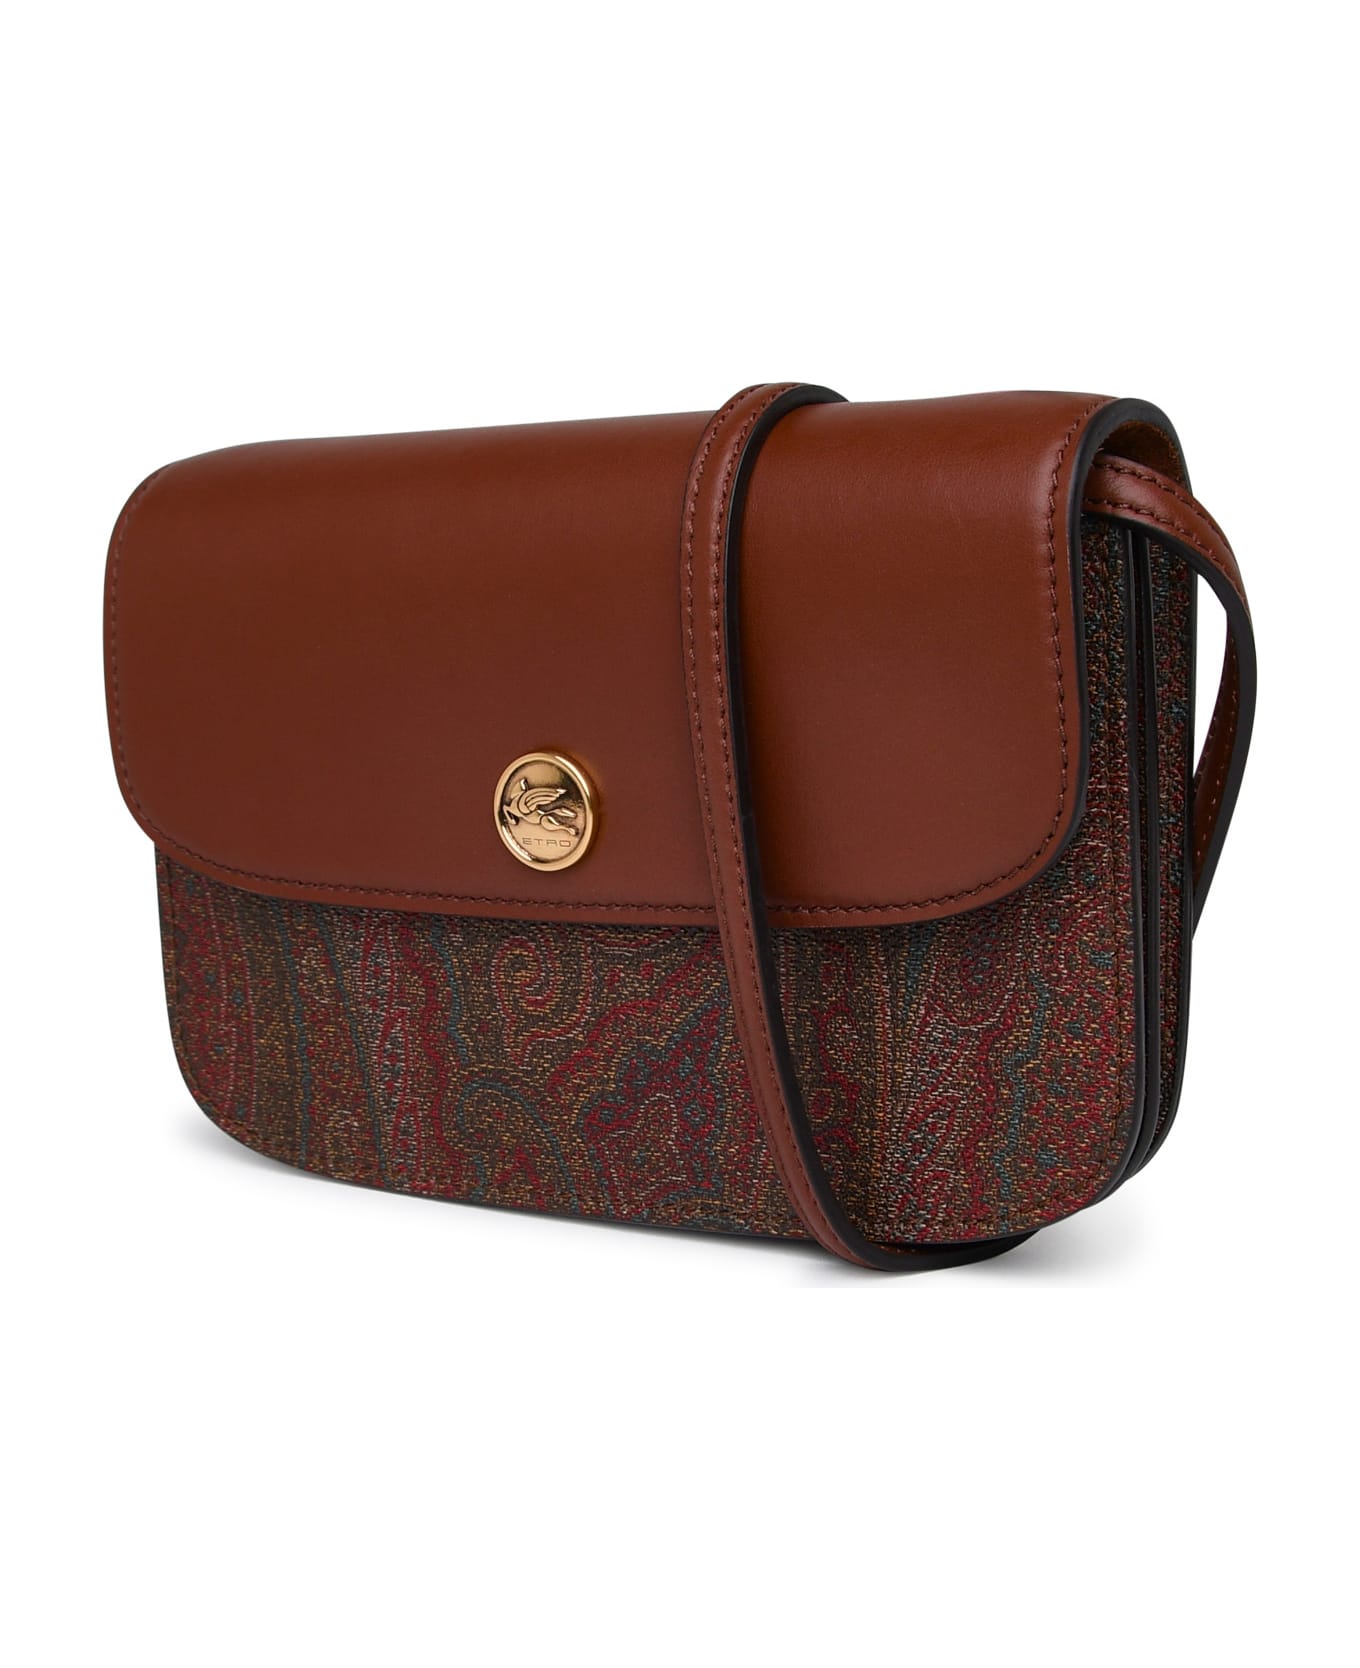 Etro Essential Bag In Brown Cotton Blend - Brown ショルダーバッグ